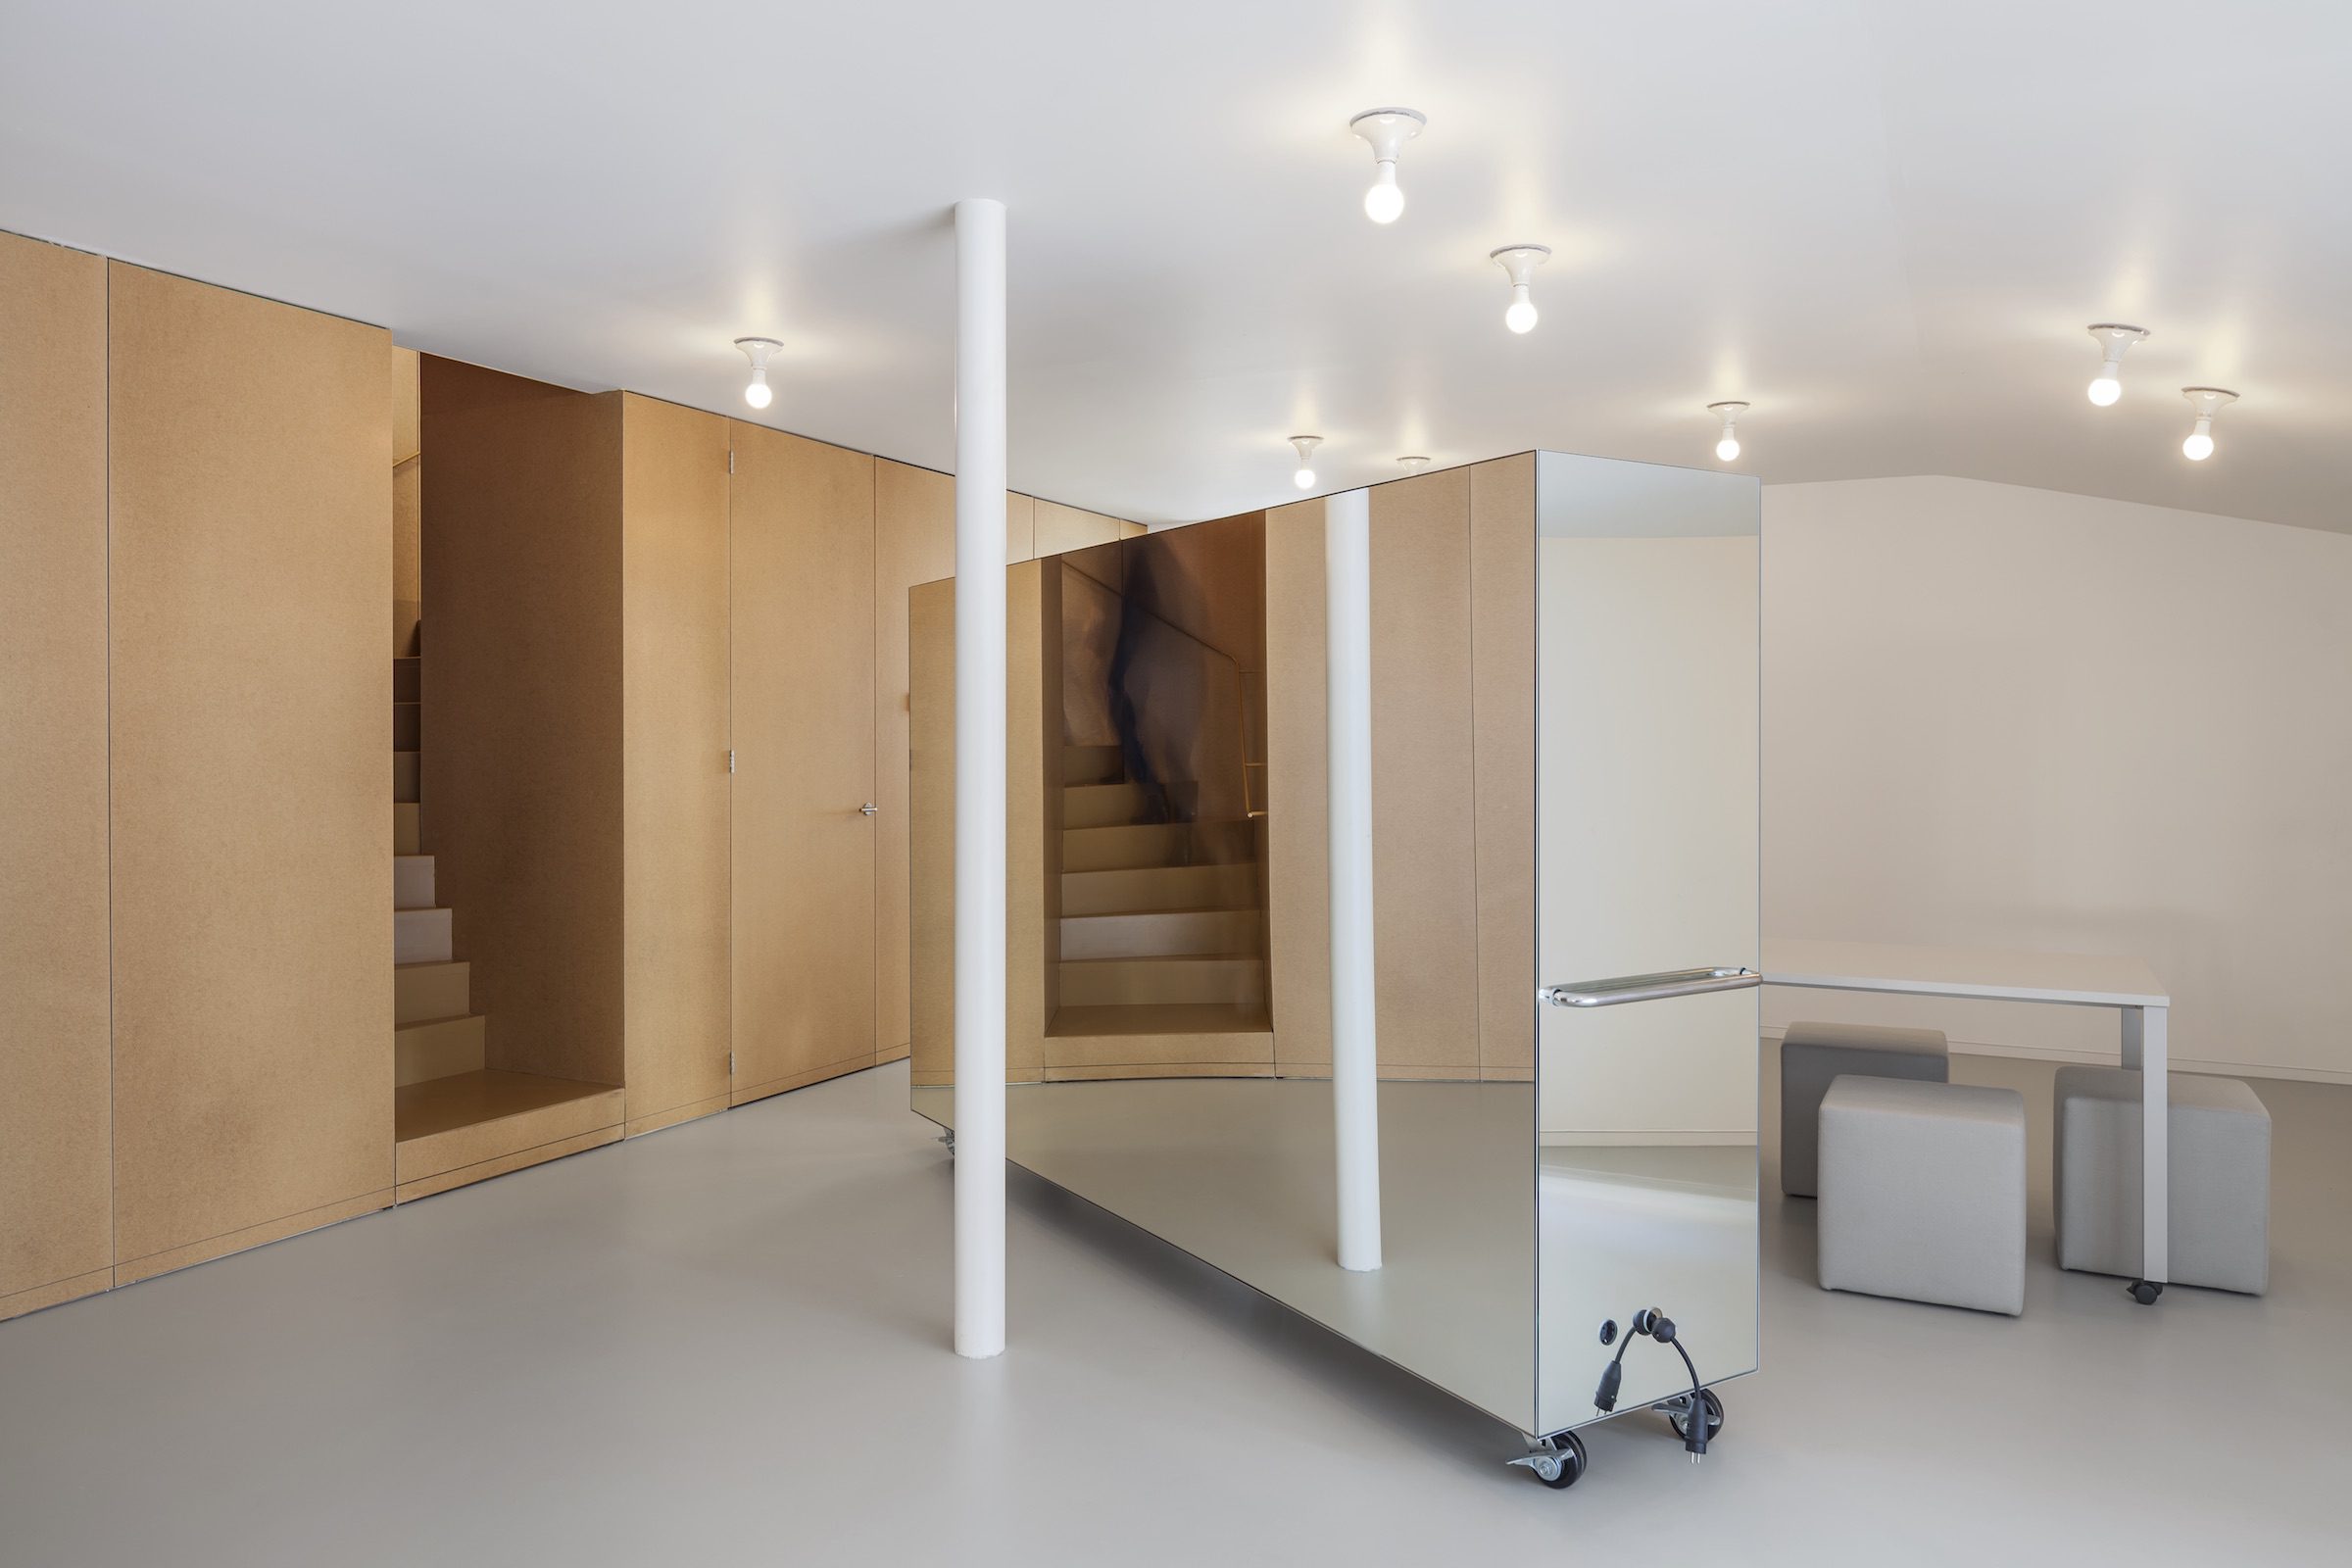 GMK 5 Office -  - a project by Space Encounters Office for Architecture